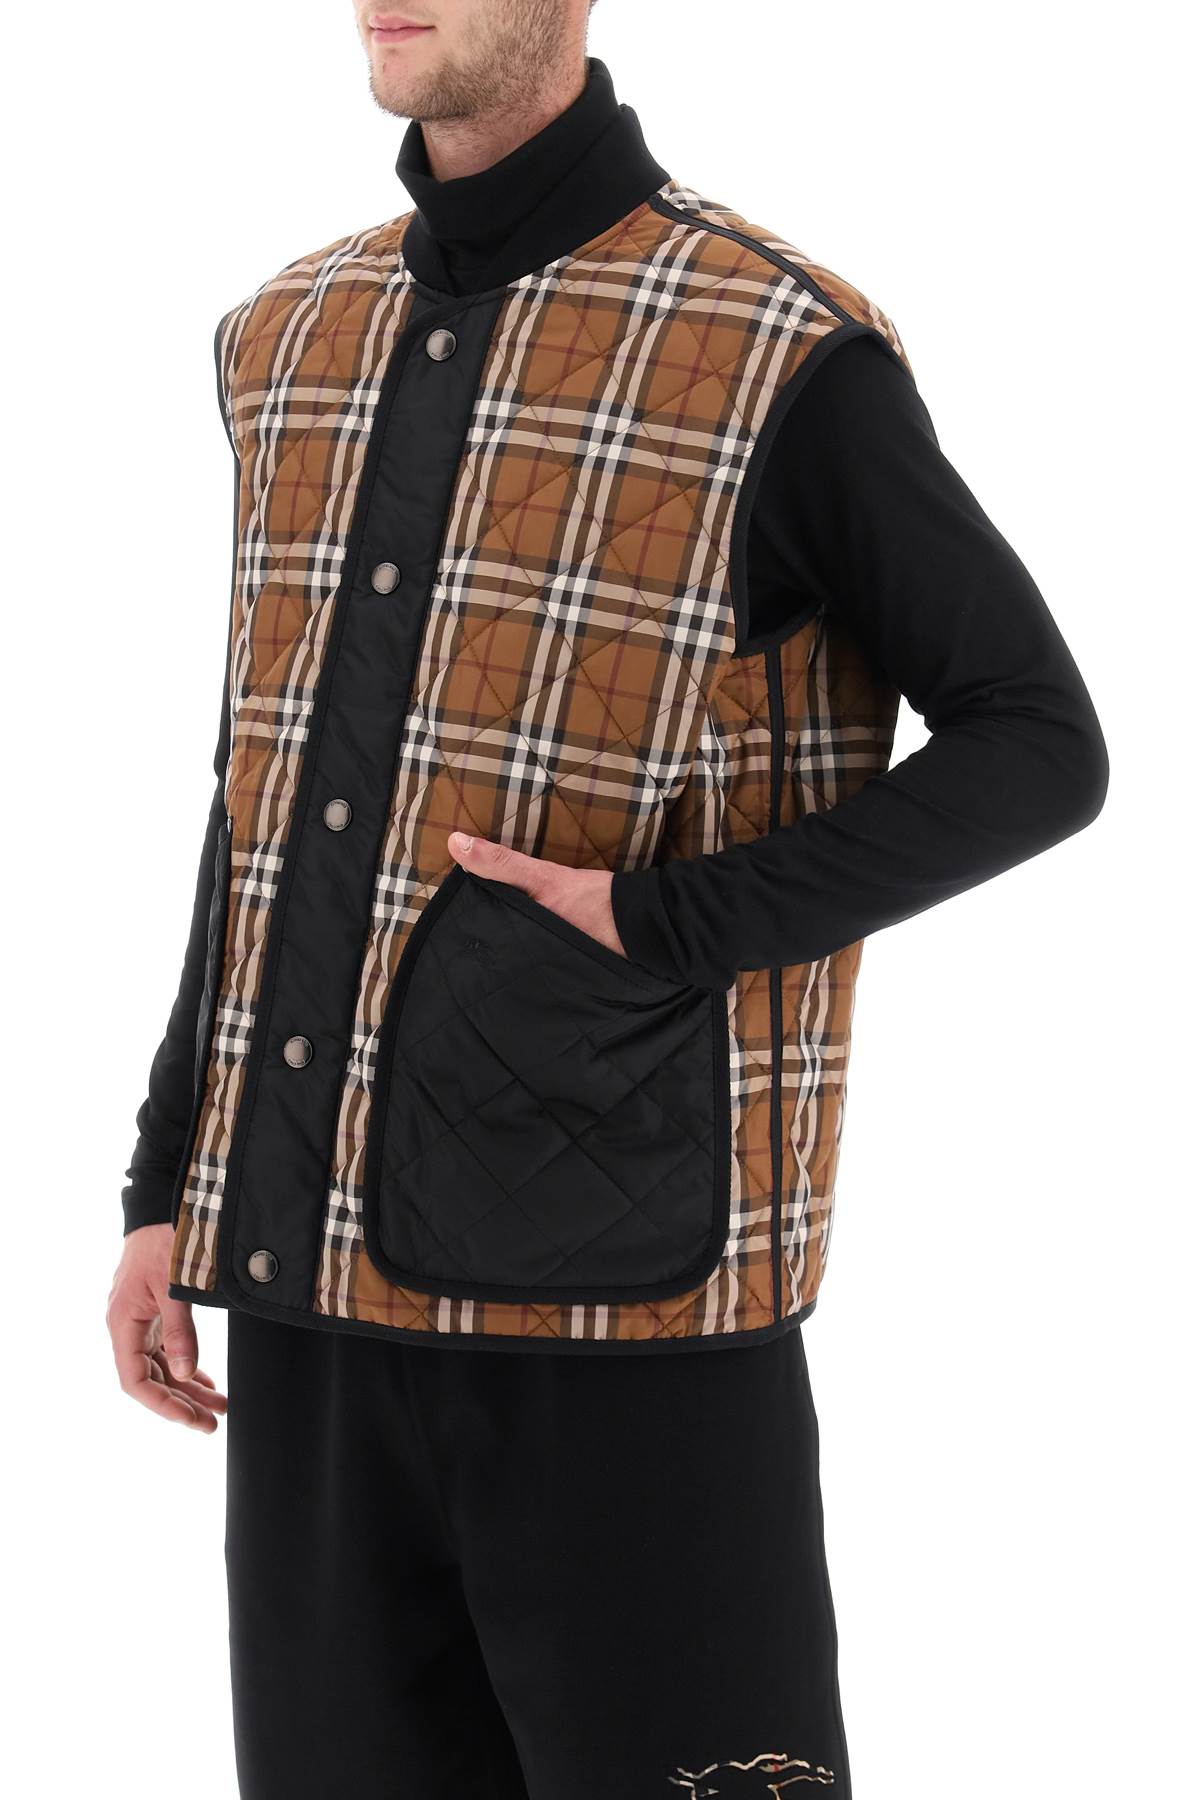 Burberry Burberry weaveron quilted vest